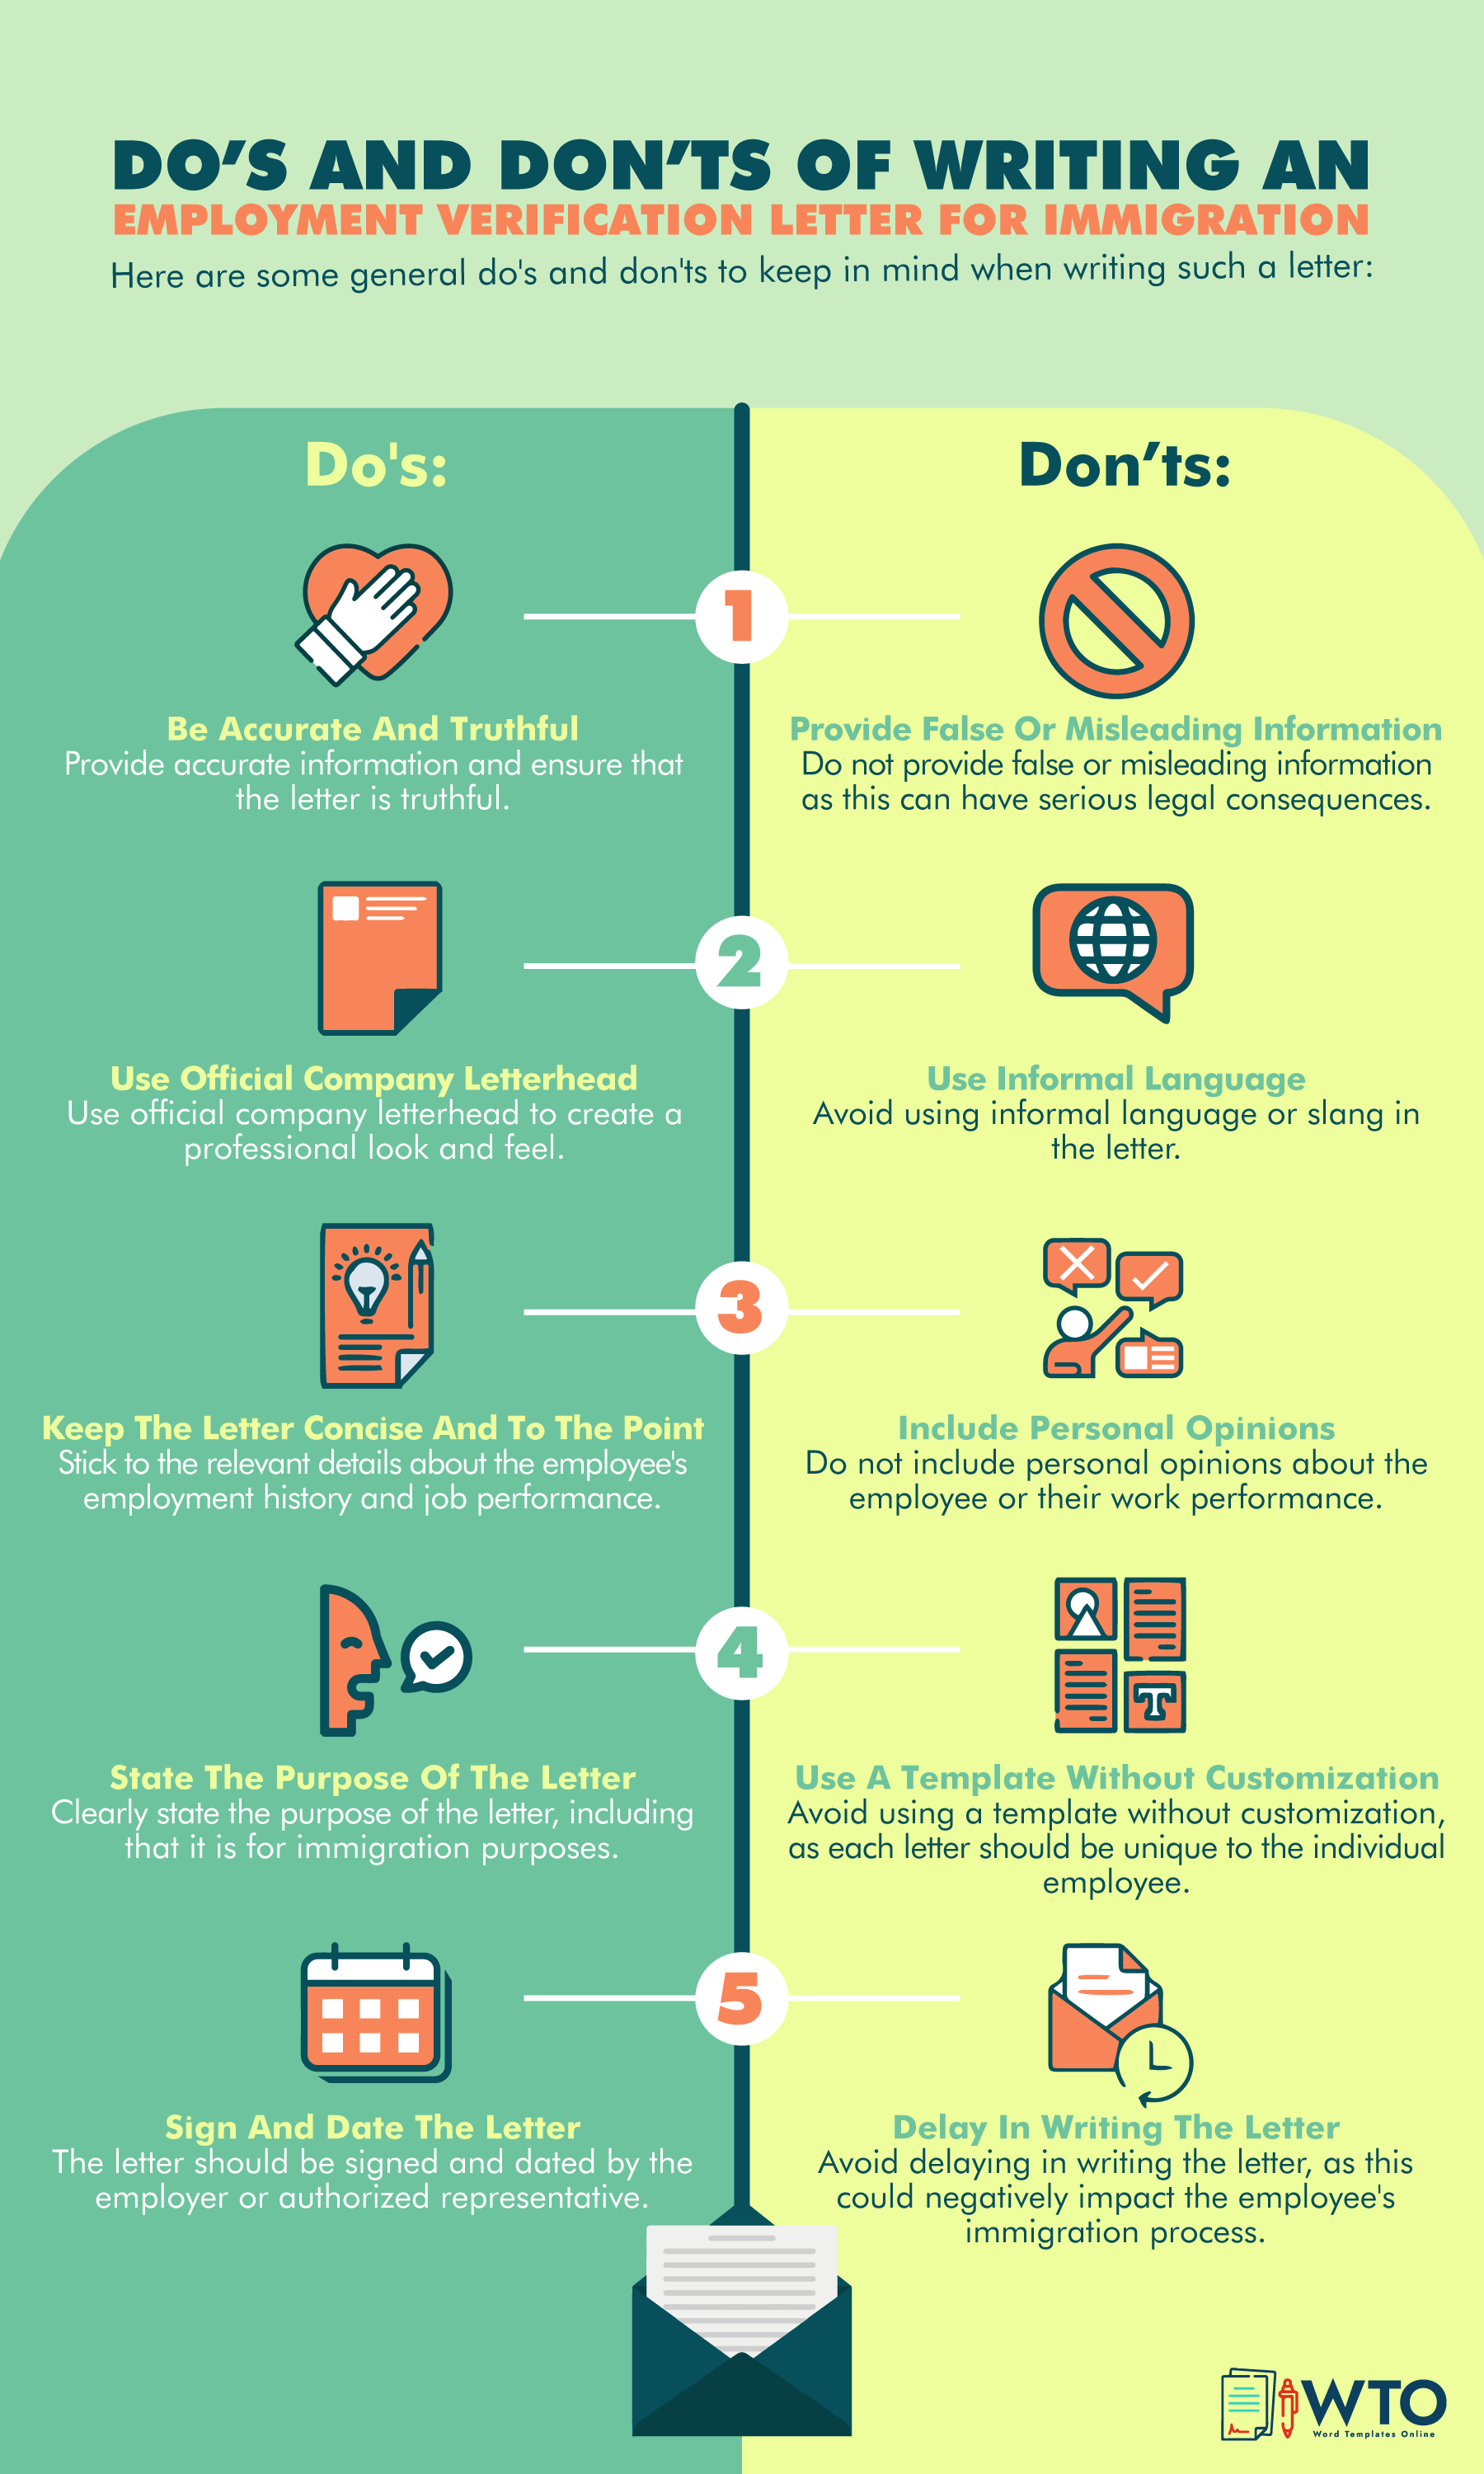 This infographic is about do's and don'ts of writing EVL for immigration.